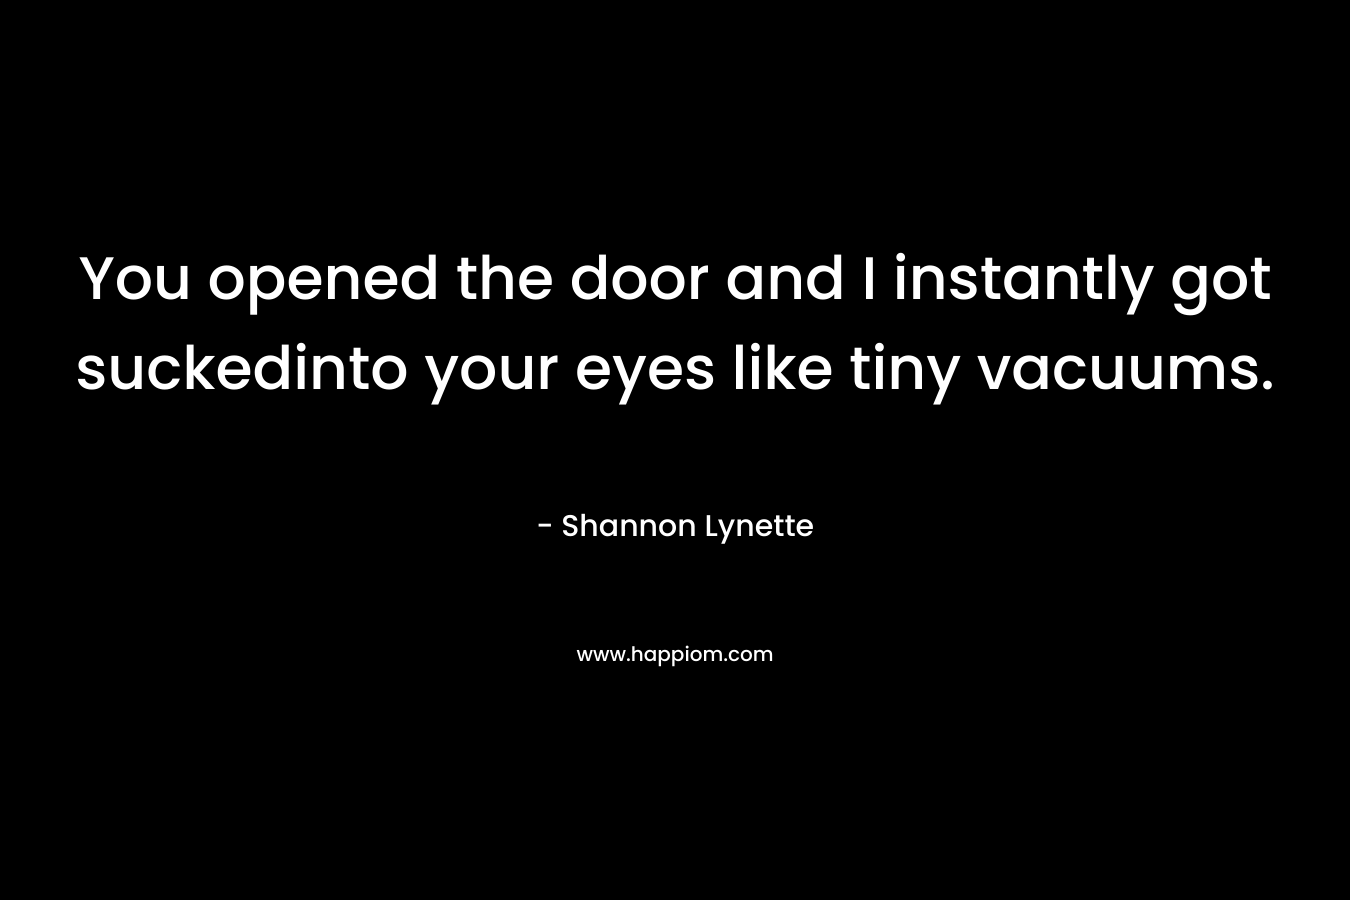 You opened the door and I instantly got suckedinto your eyes like tiny vacuums.